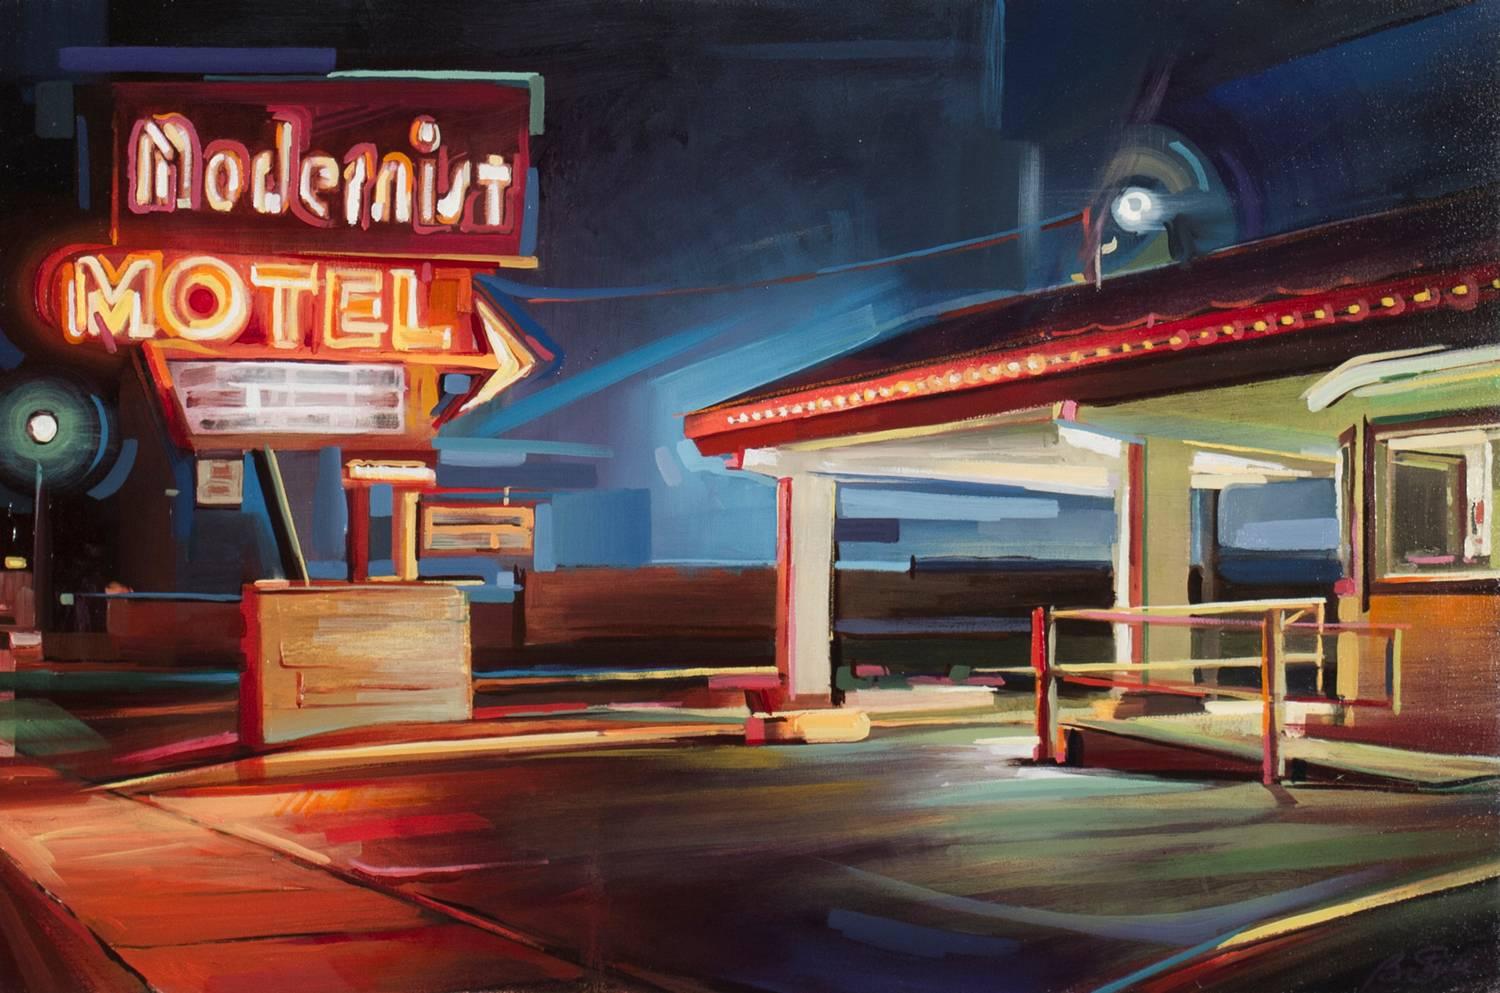 Modernist Motel - Painting by Ben Steele